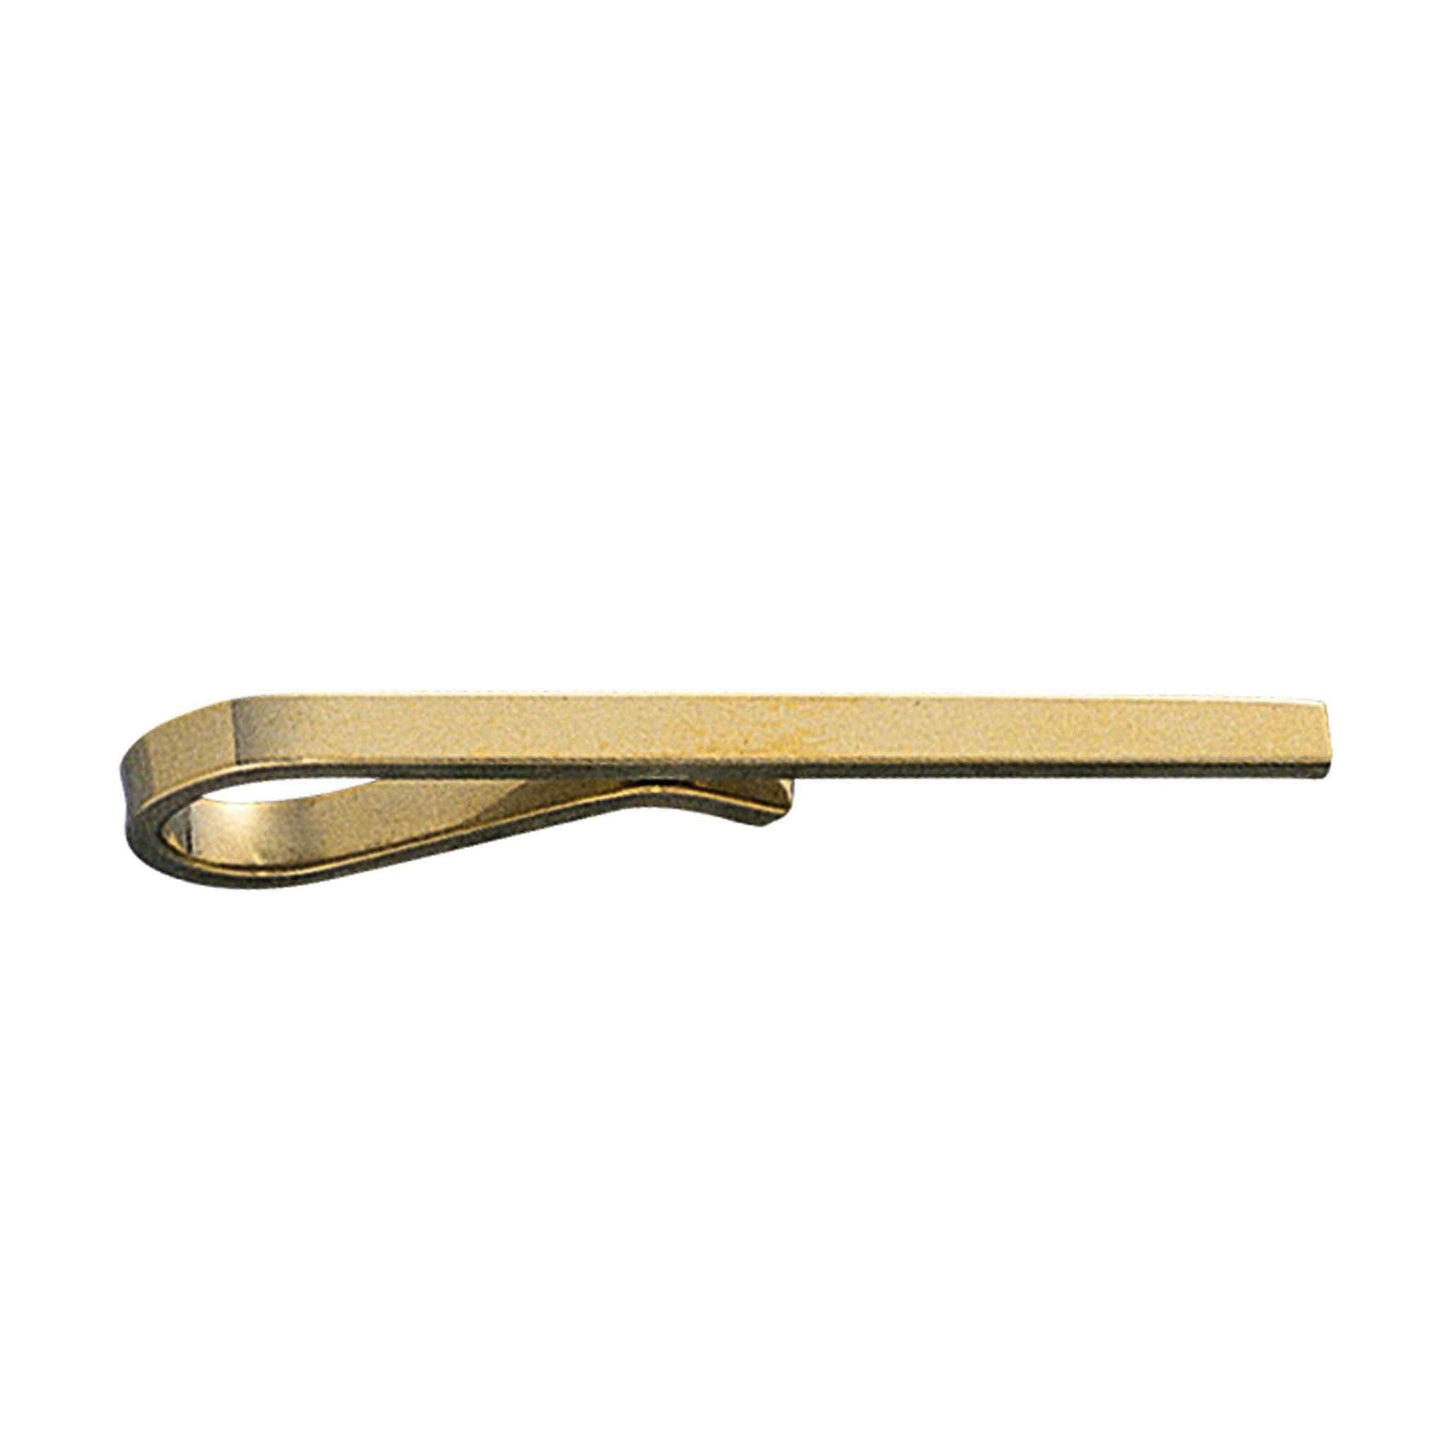 A 14k yellow gold skinny tie slide displayed on a neutral white background.